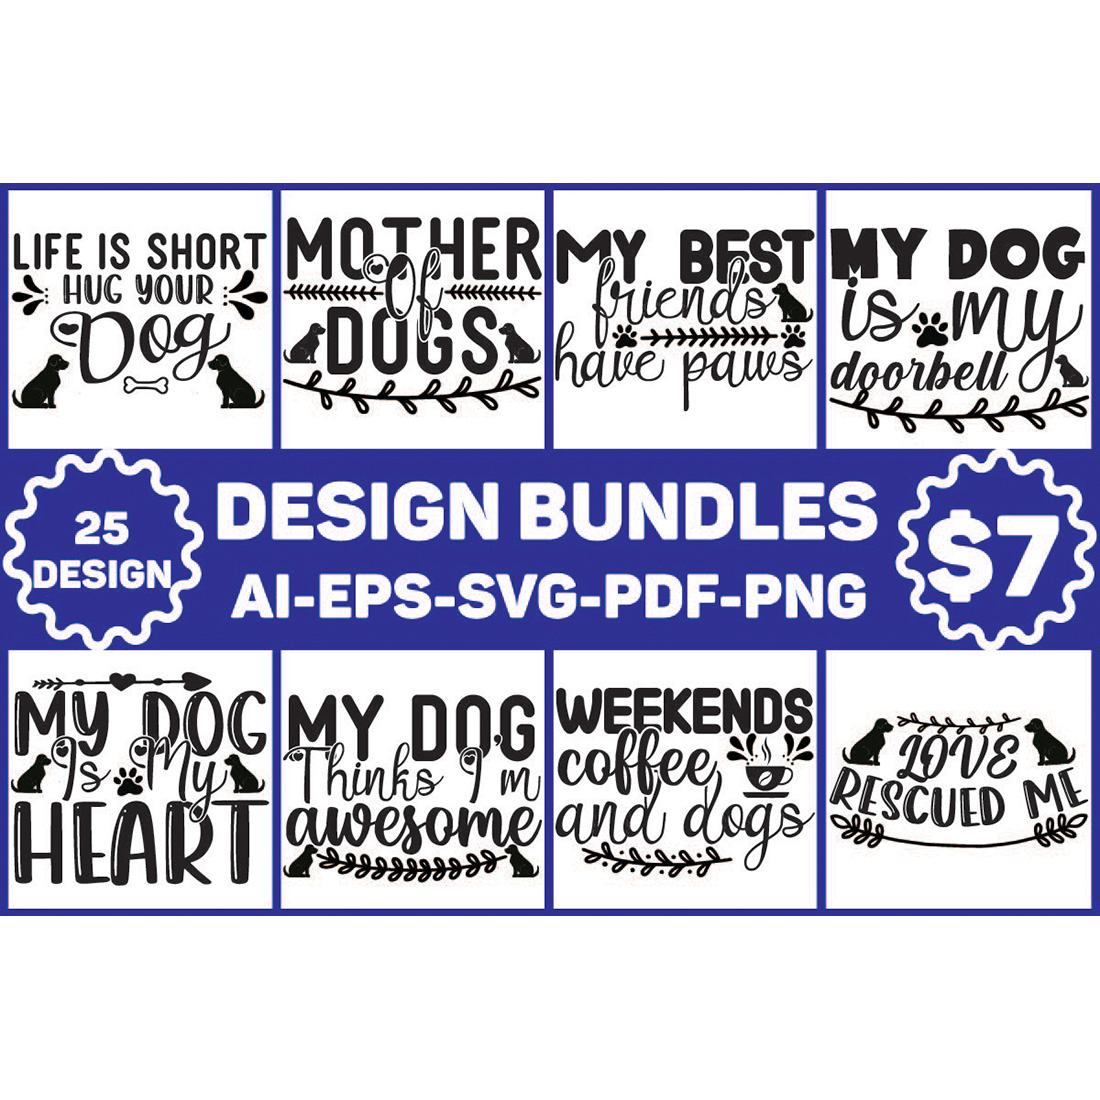 Blue and white sign that says design bundles $ 7 95.